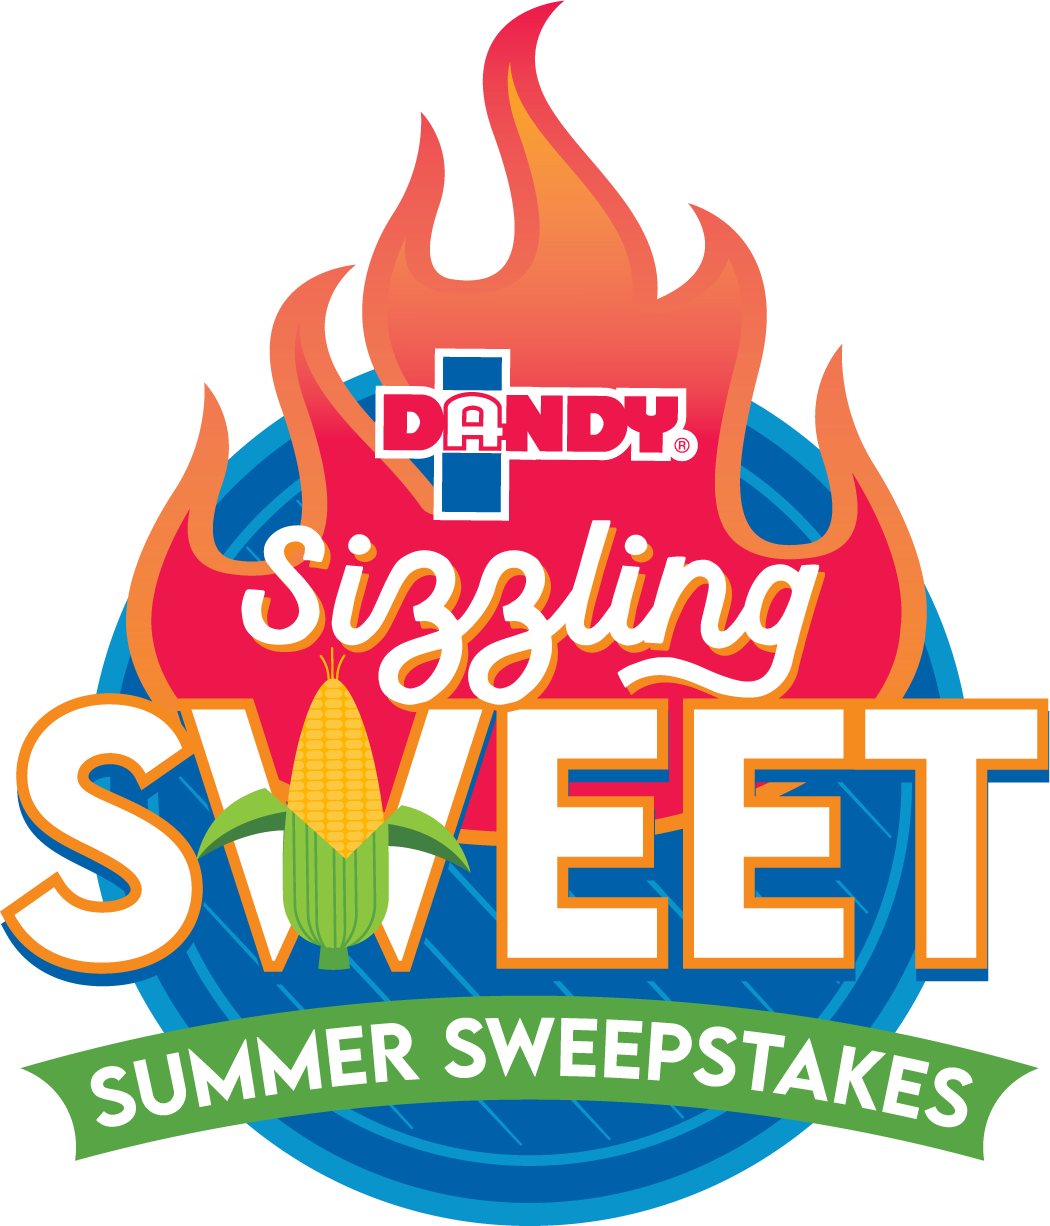 logo-sizzling-sweet-summer-sweepstakes-1